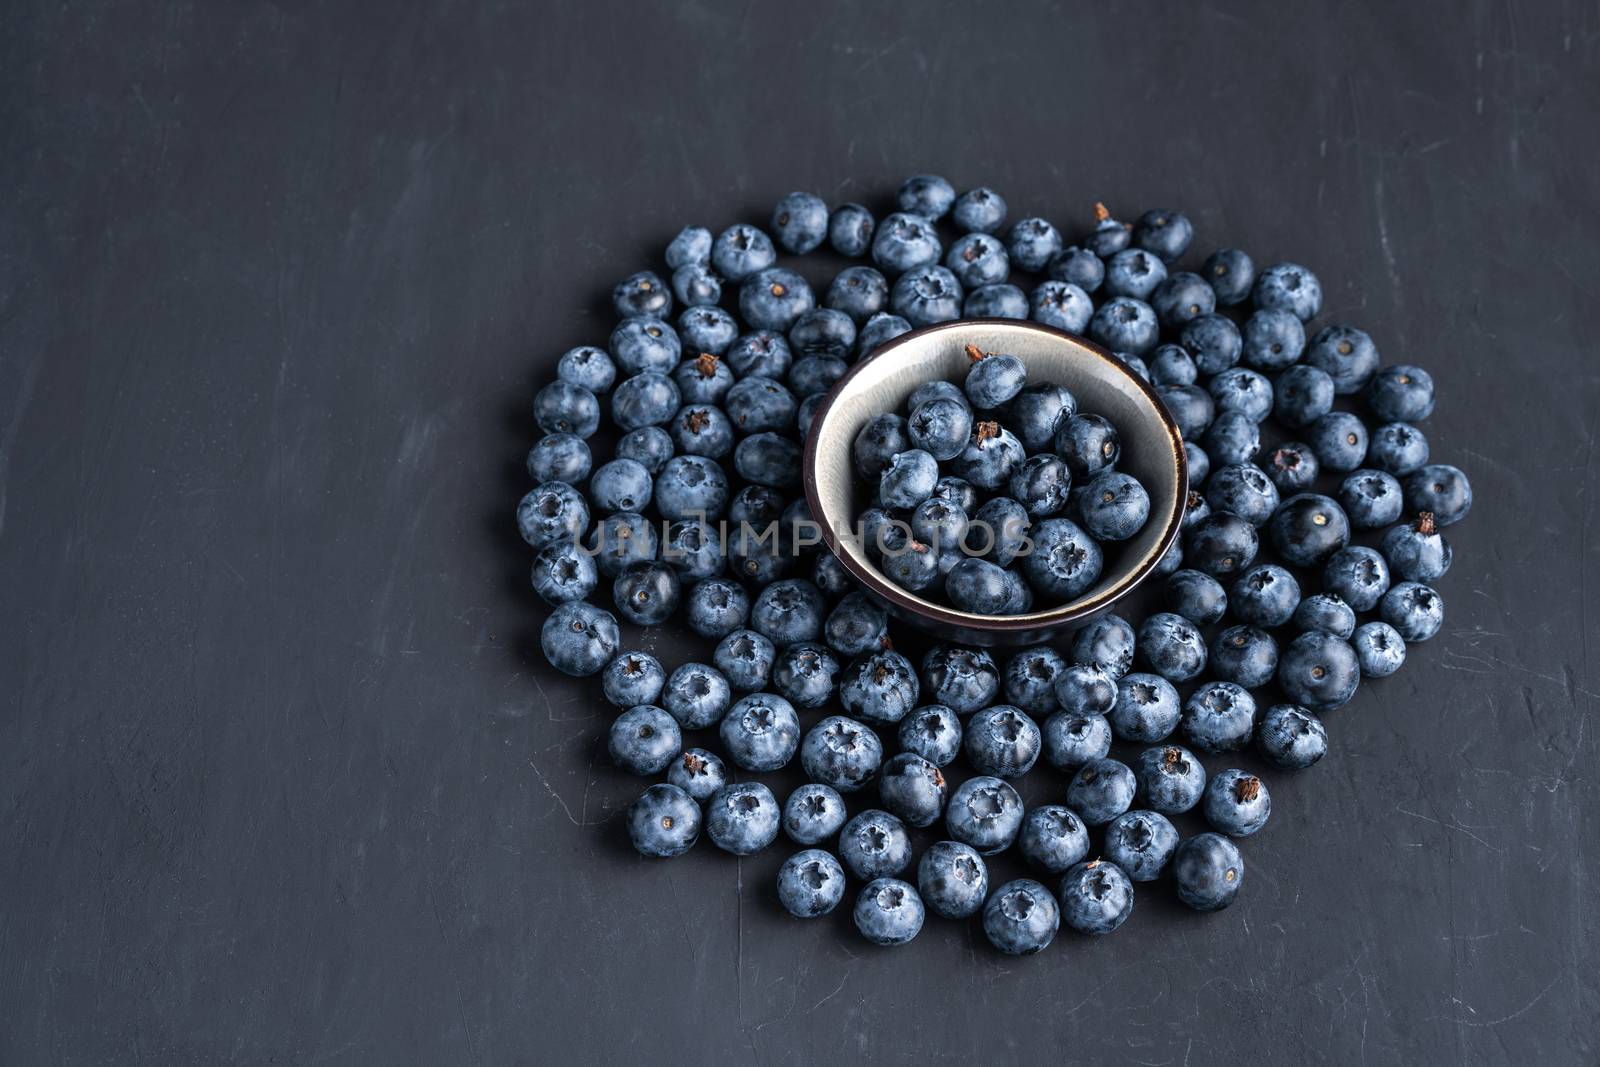 Blueberry antioxidant organic superfood in ceramic bowl concept for healthy eating and dieting nutrition Top view on dark black background